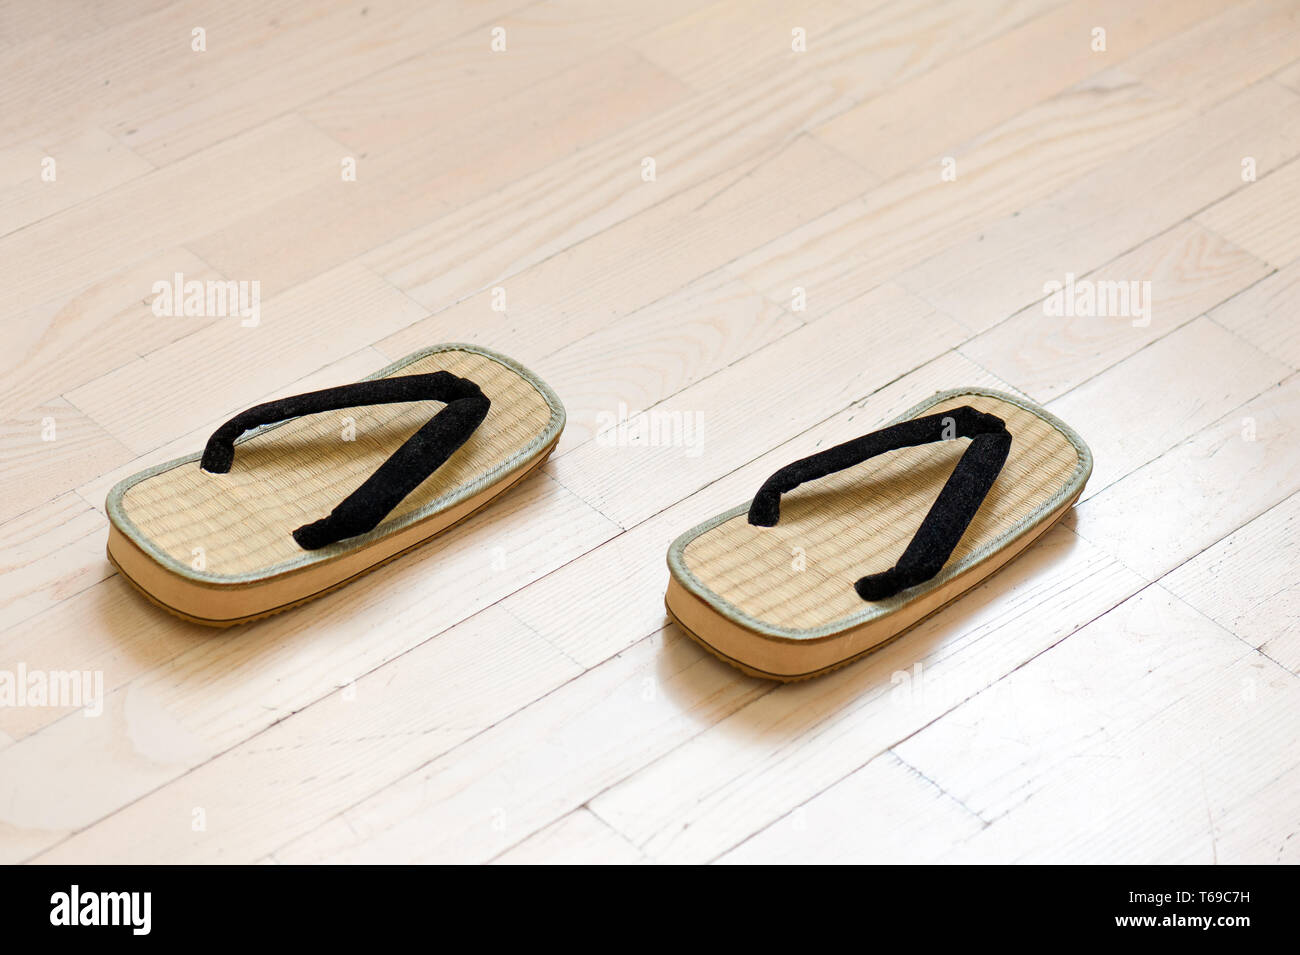 Pair of Traditional Japanese Sandals on Old Wooden Floor Stock Photo ...